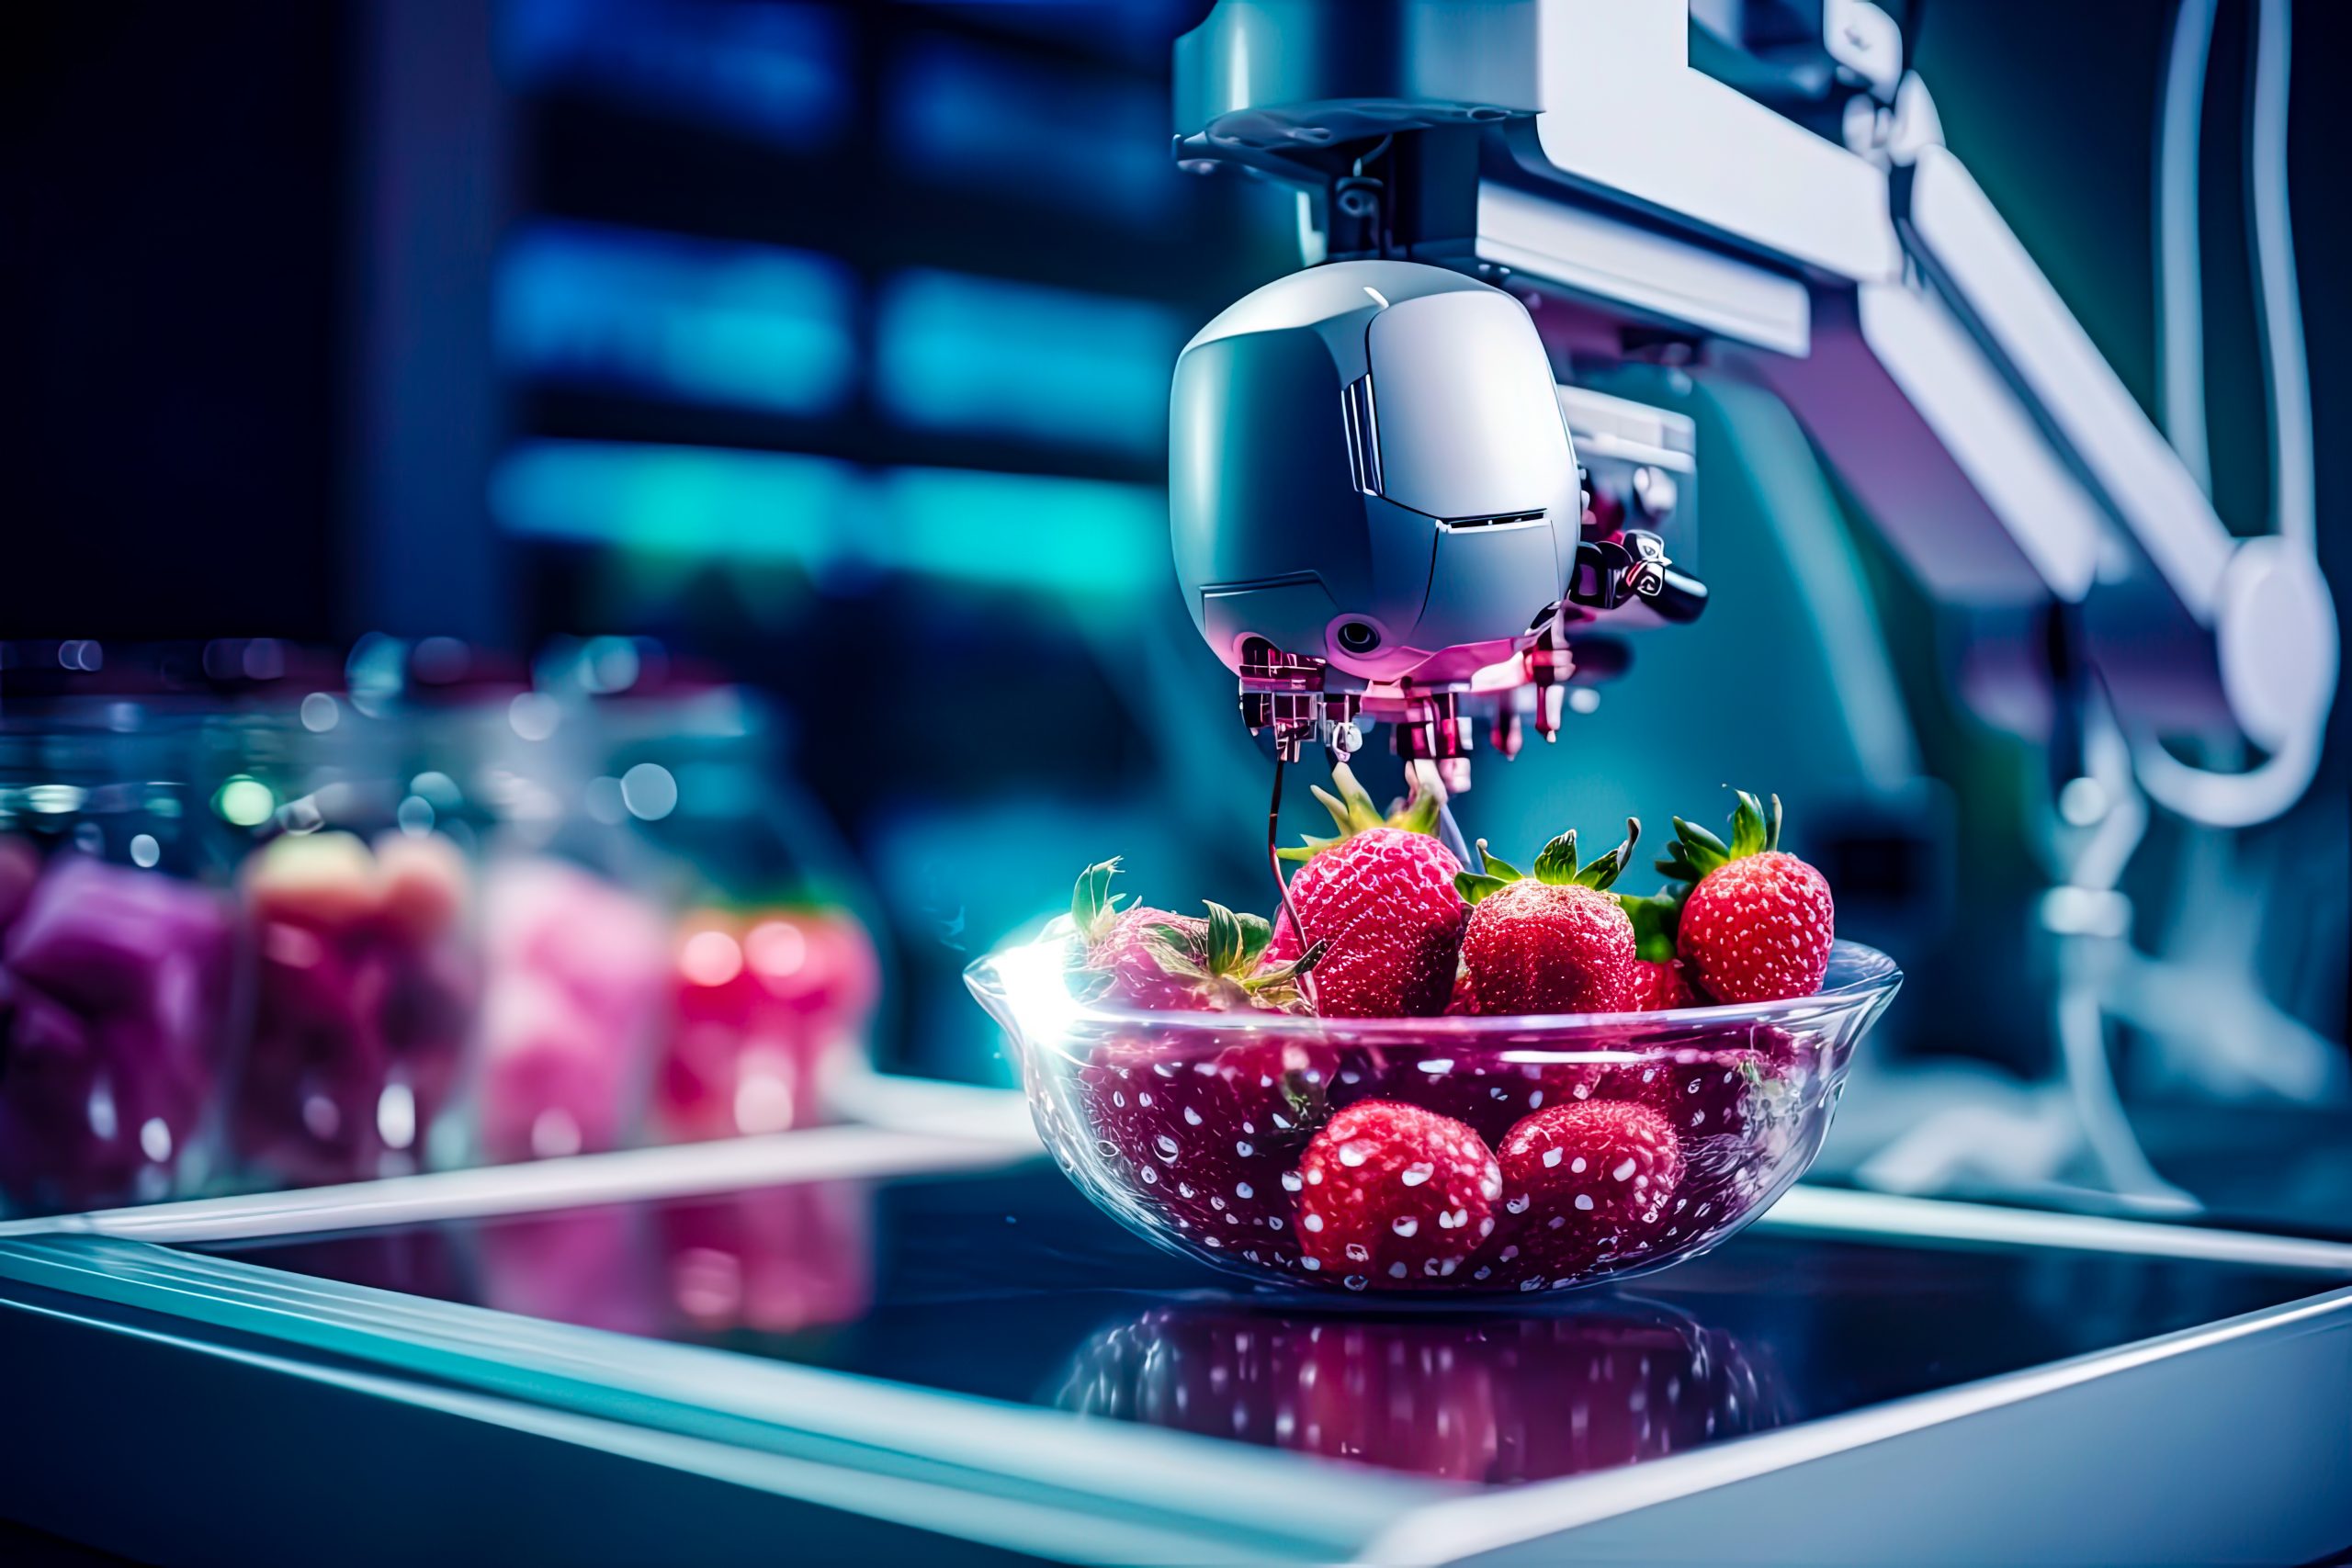 role of AI in food safety